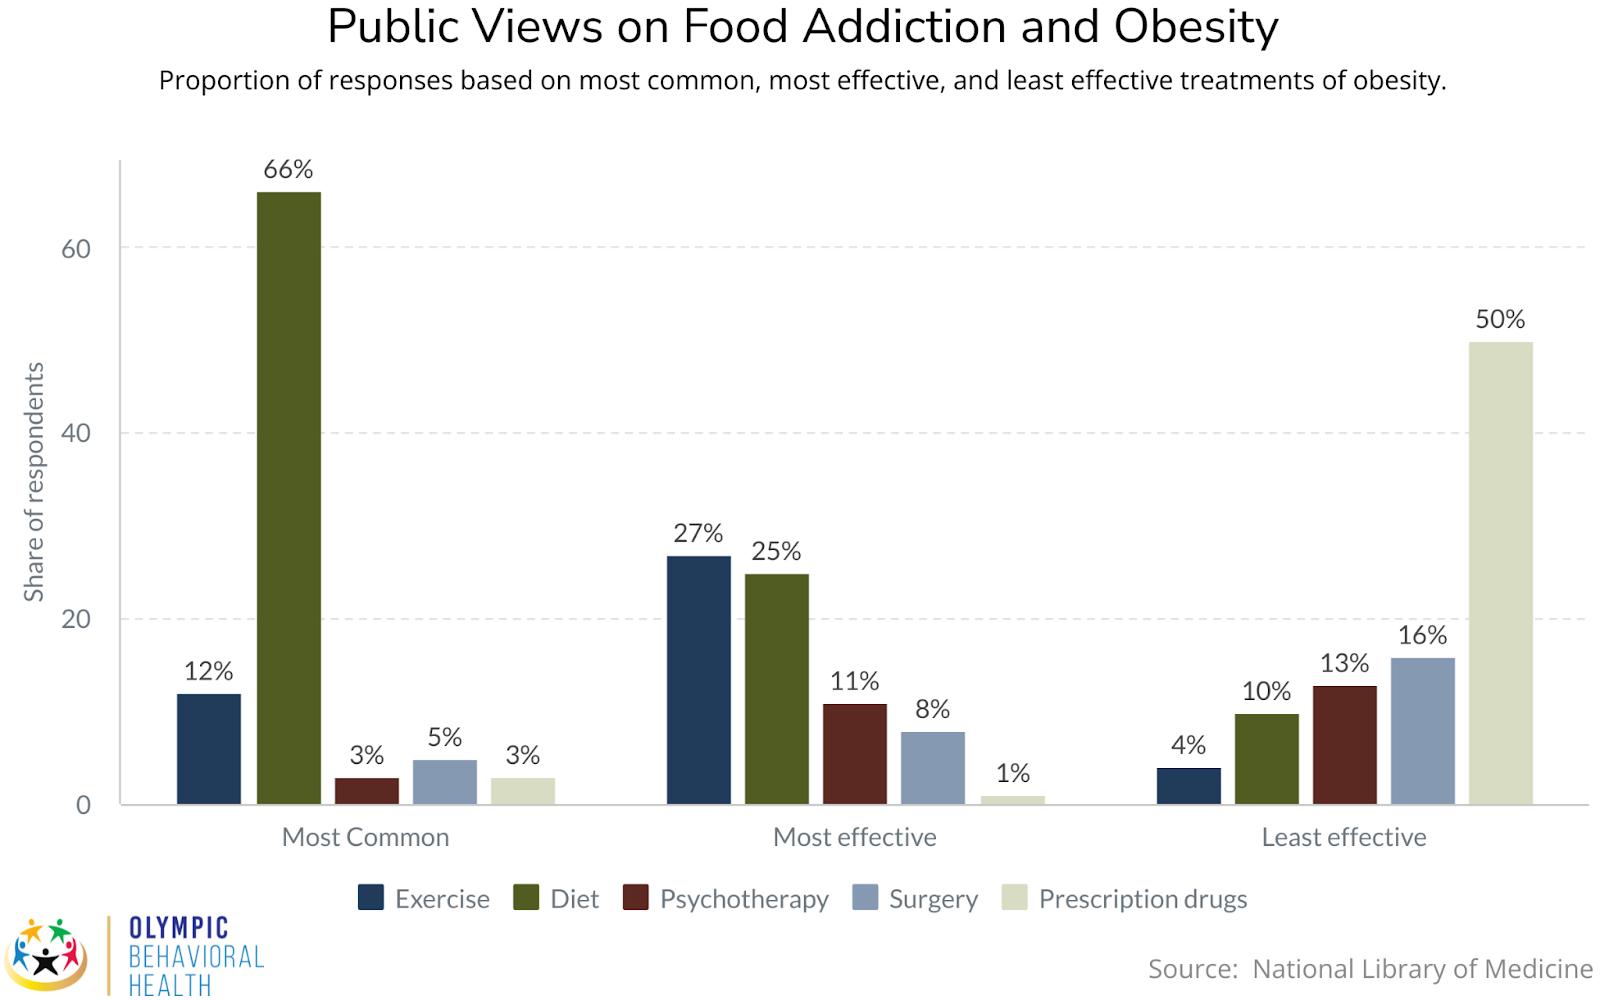 Public Views on Food Addiction and Obesity